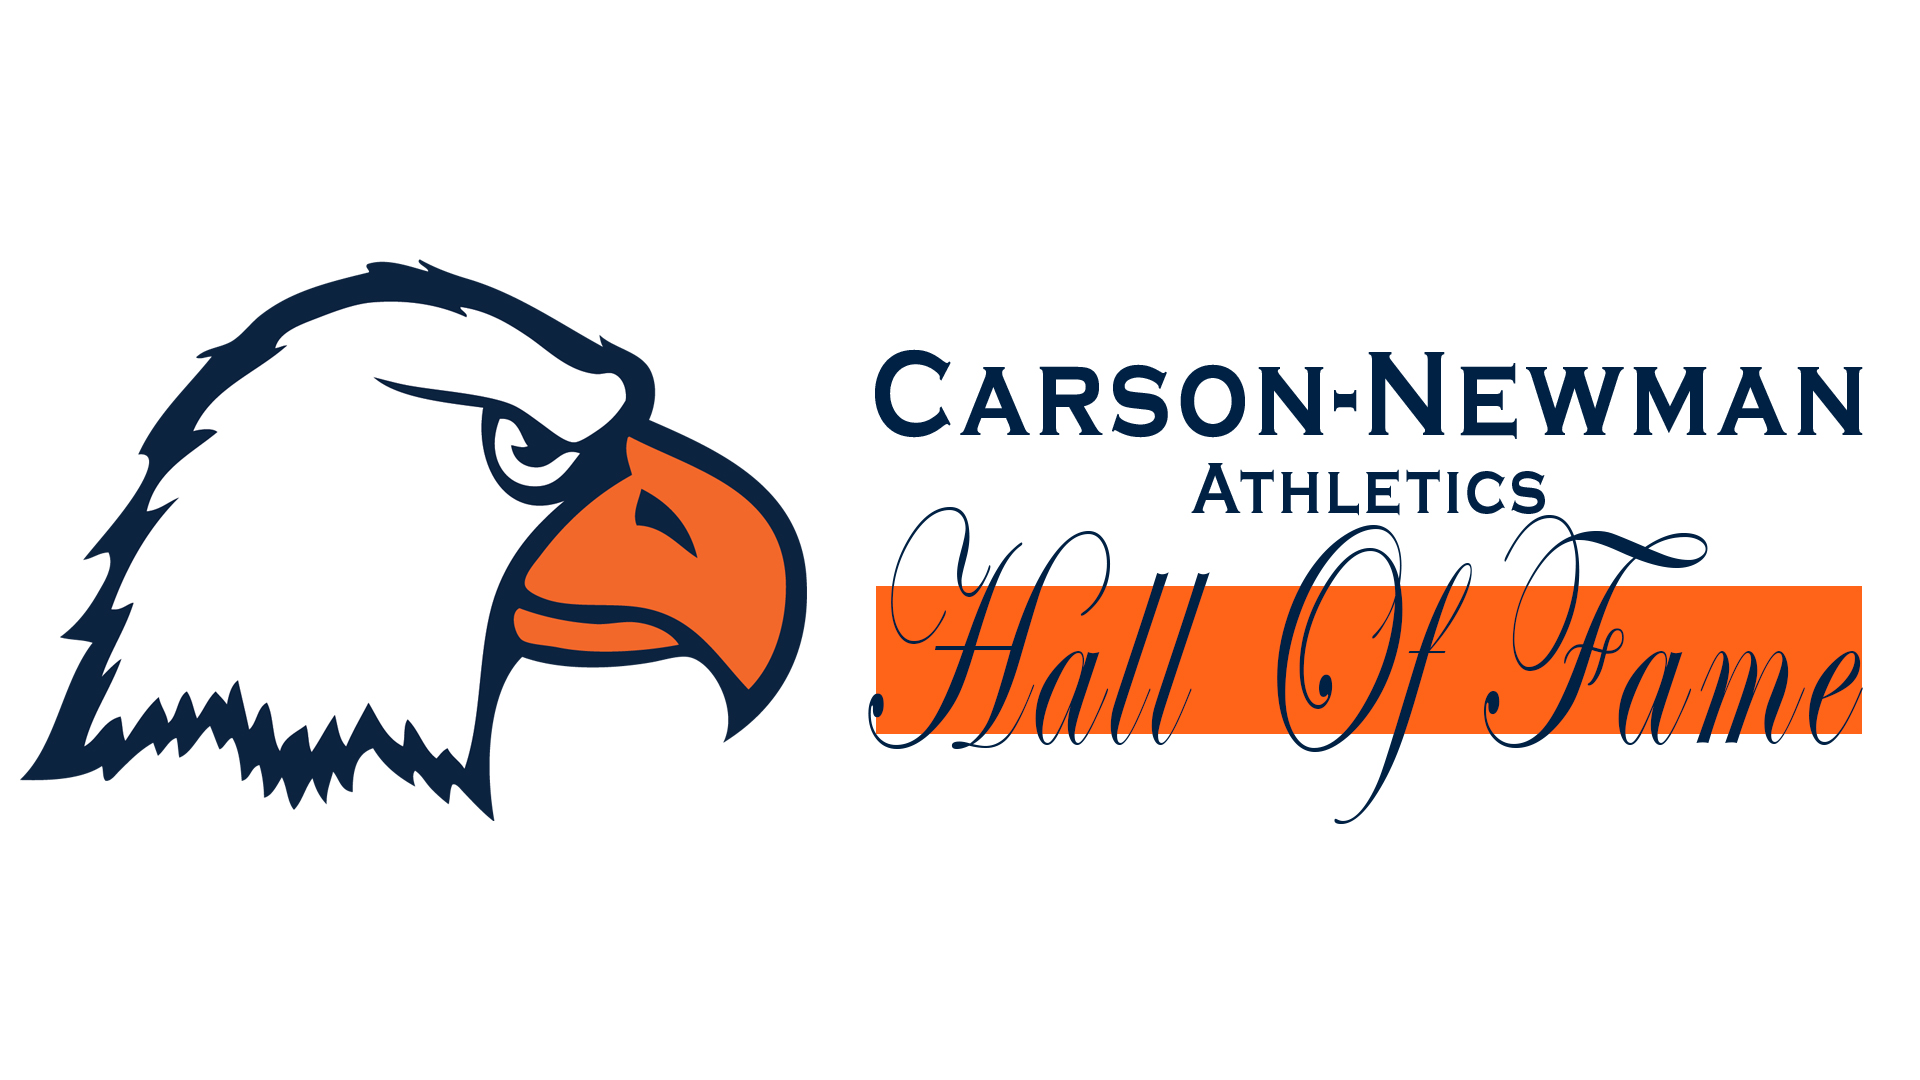 Ballot released for 2020 Carson-Newman Athletics Hall of Fame